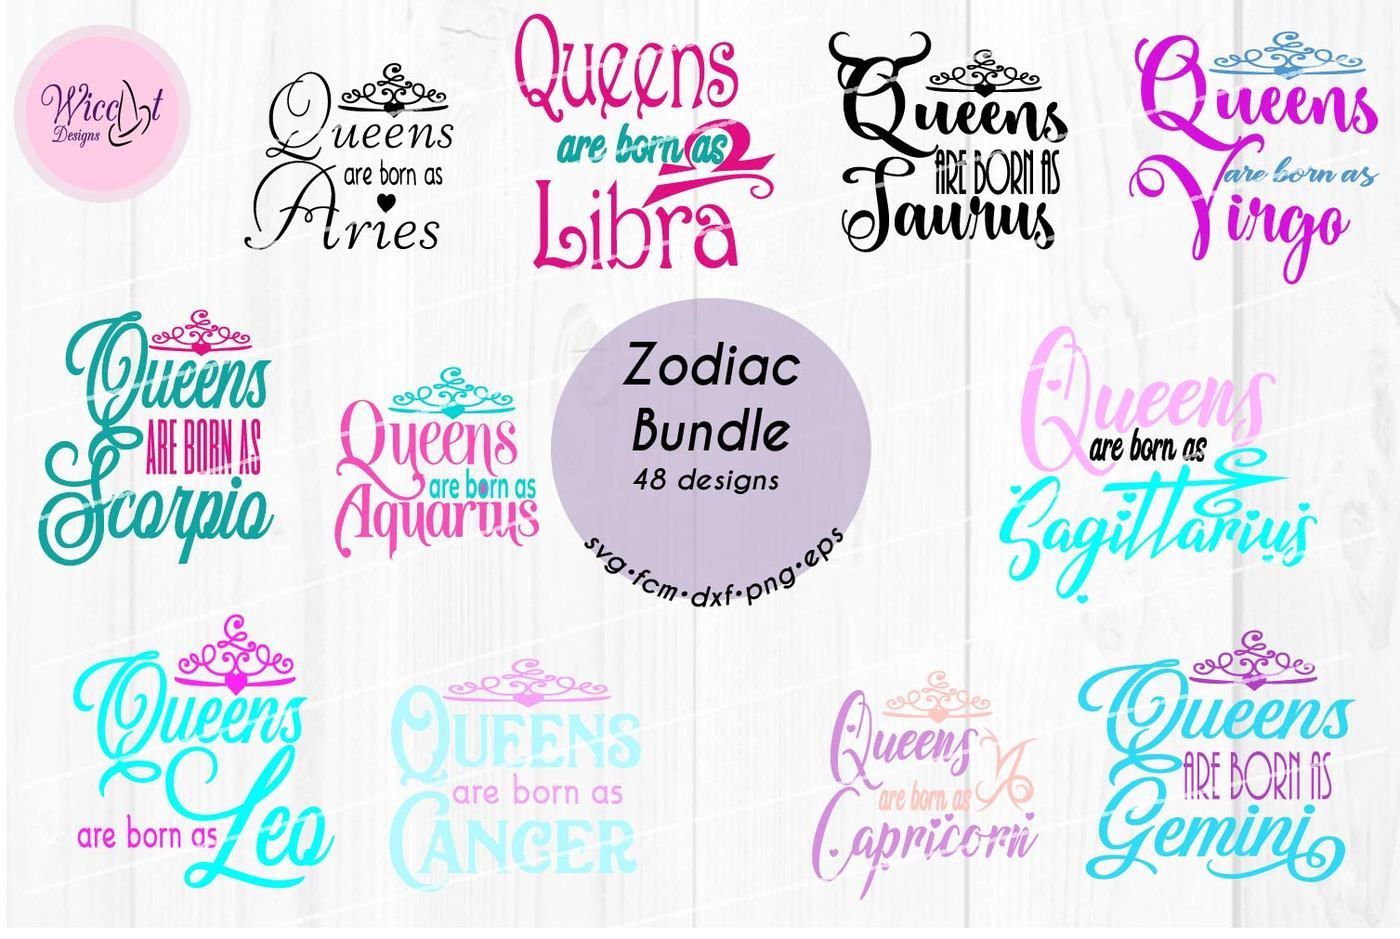 ori 3489746 029f235f8b187bf136b809659d7c838ca2fb3923 zodiac bundle svg all zodiac signs queens are born as